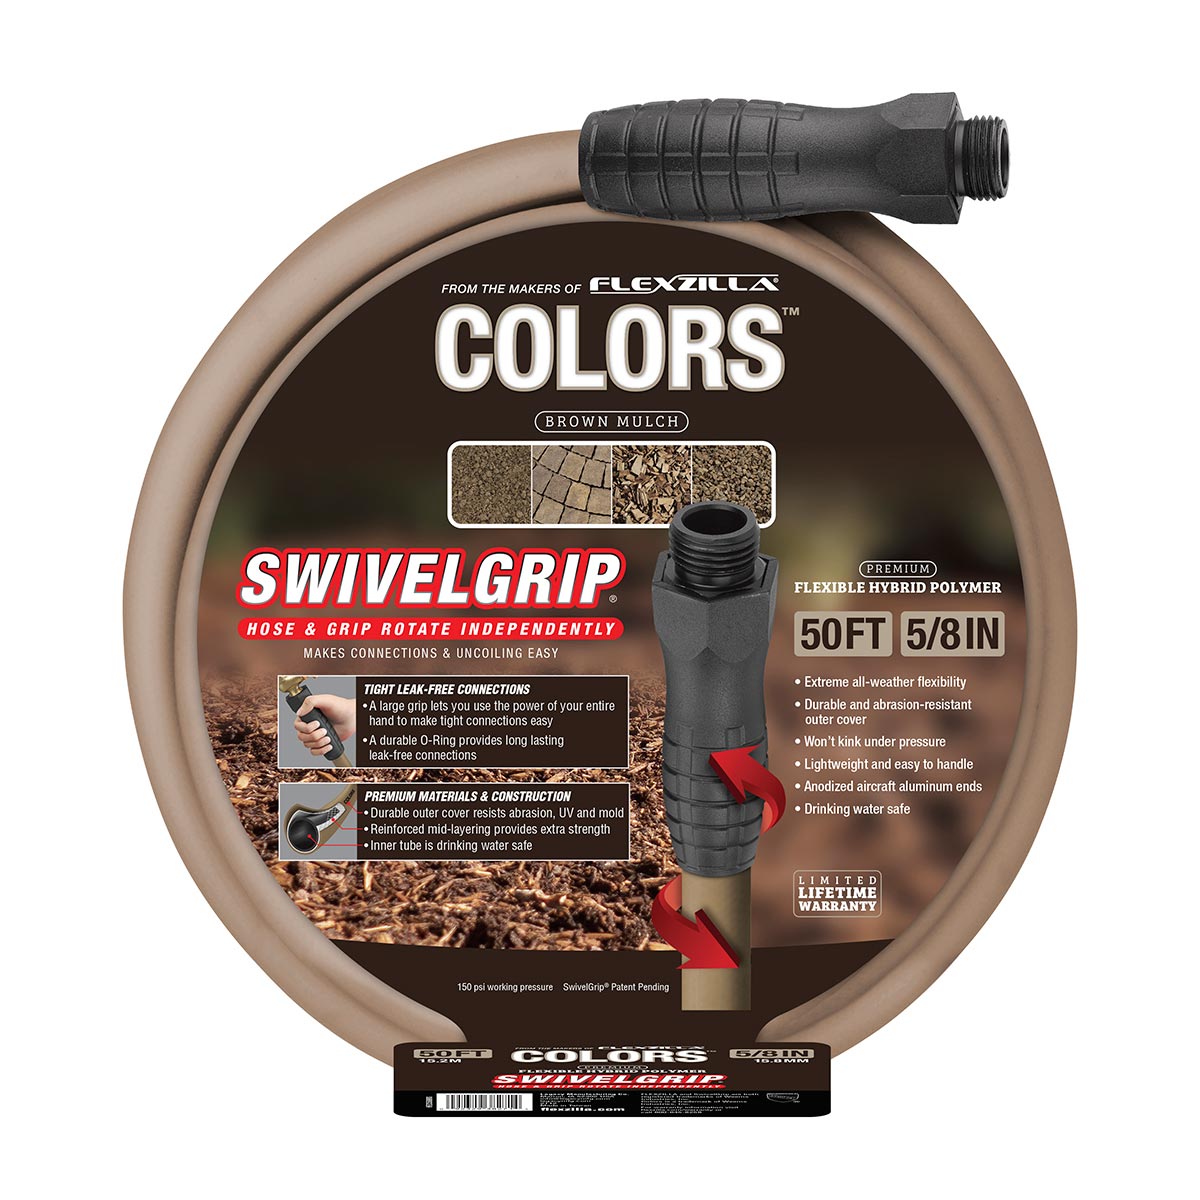 Flexzilla® Colors™ SwivelGrip® Garden Hose, 5/8″ x 50′, 3/4″ – 11 1/2 GHT  Fittings, Brown Mulch – The Wholesale House